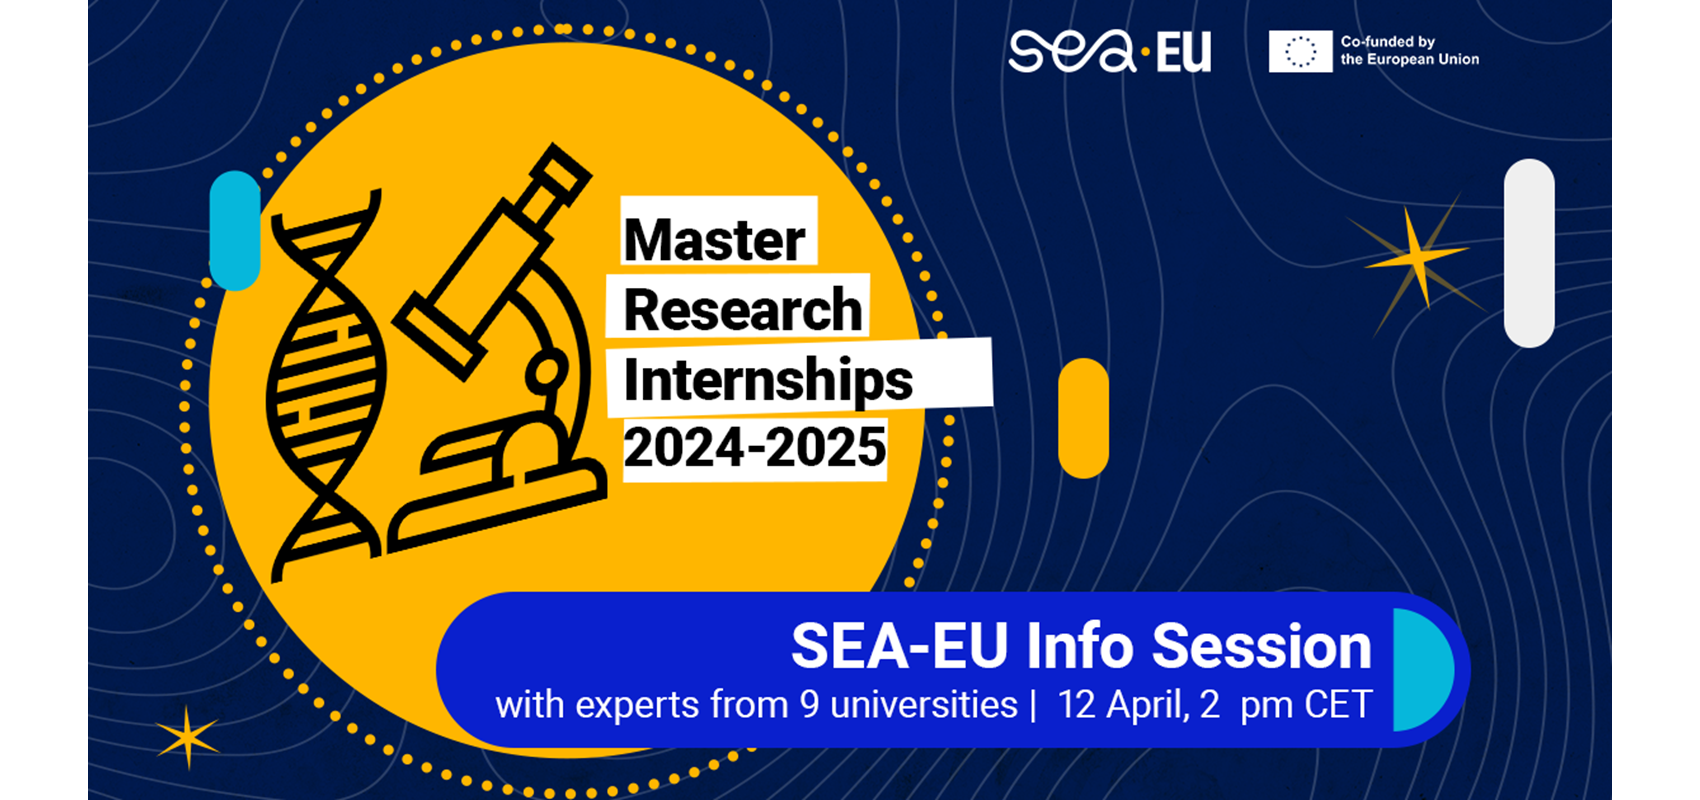 Professors, join the info session on SEA-EU Master Research Internships!